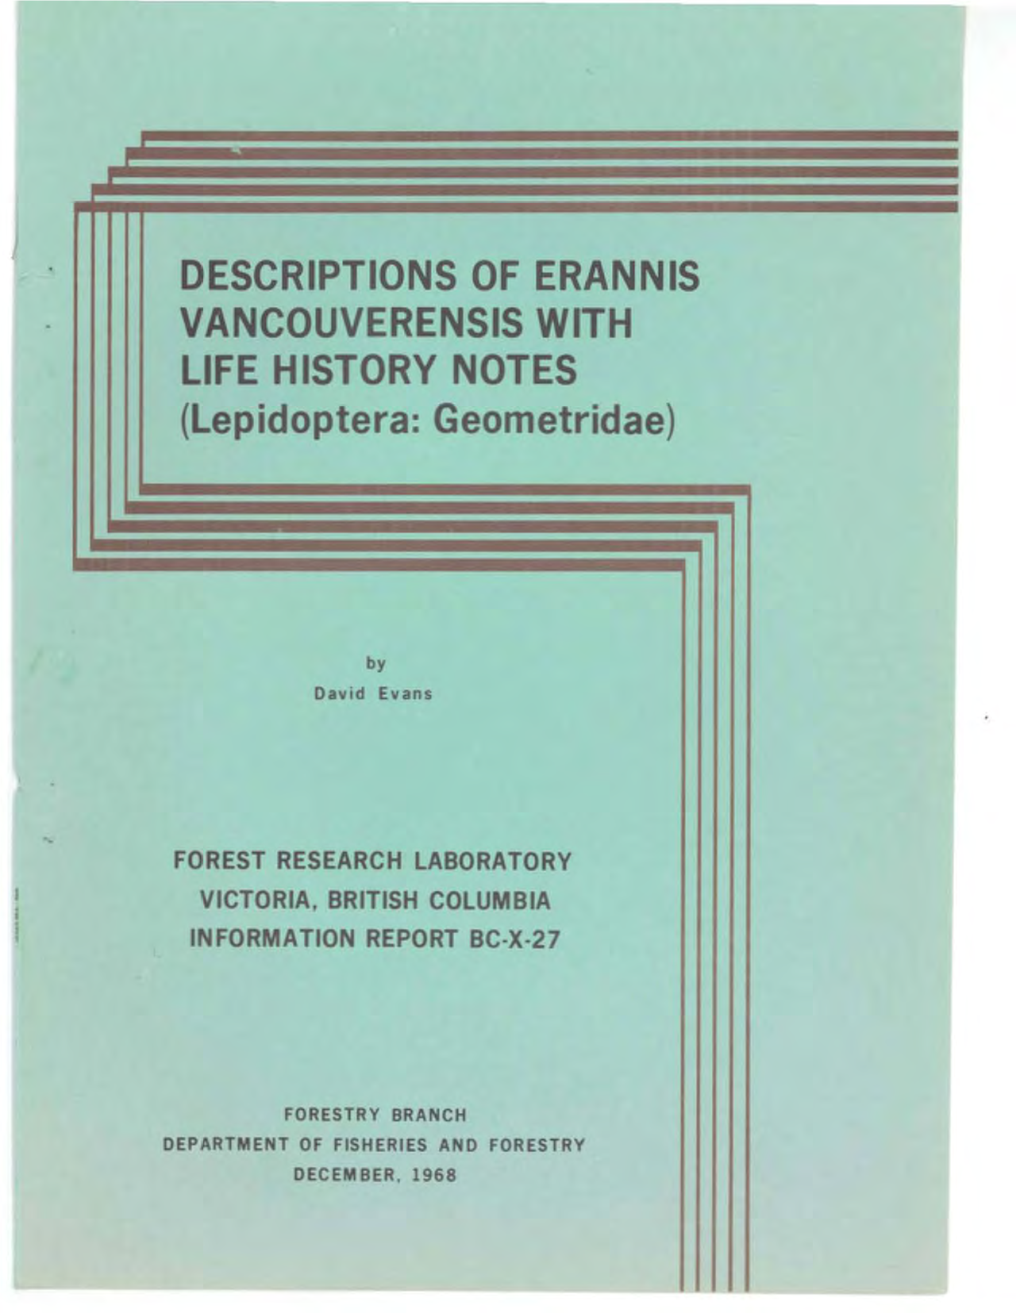 DESCRIPTIONS of ERANNIS VANCOUVERENSIS with LIFE HISTORY NOTES (Lepidoptera: Geometridae)